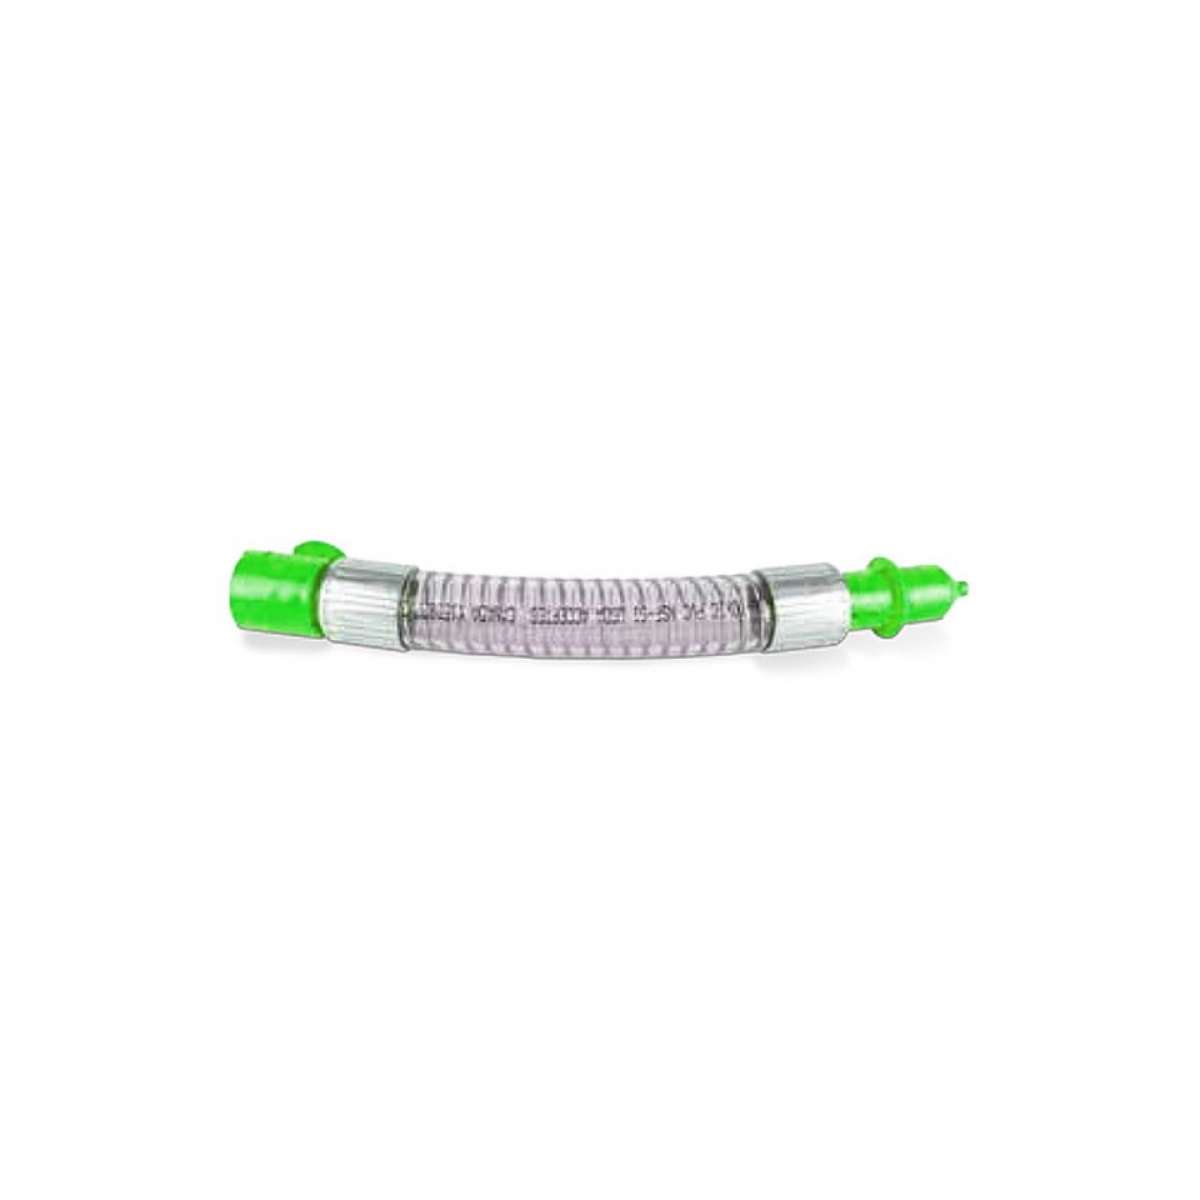 IsoLink 16" Extended Spout with 1/4" Tip - Light Green